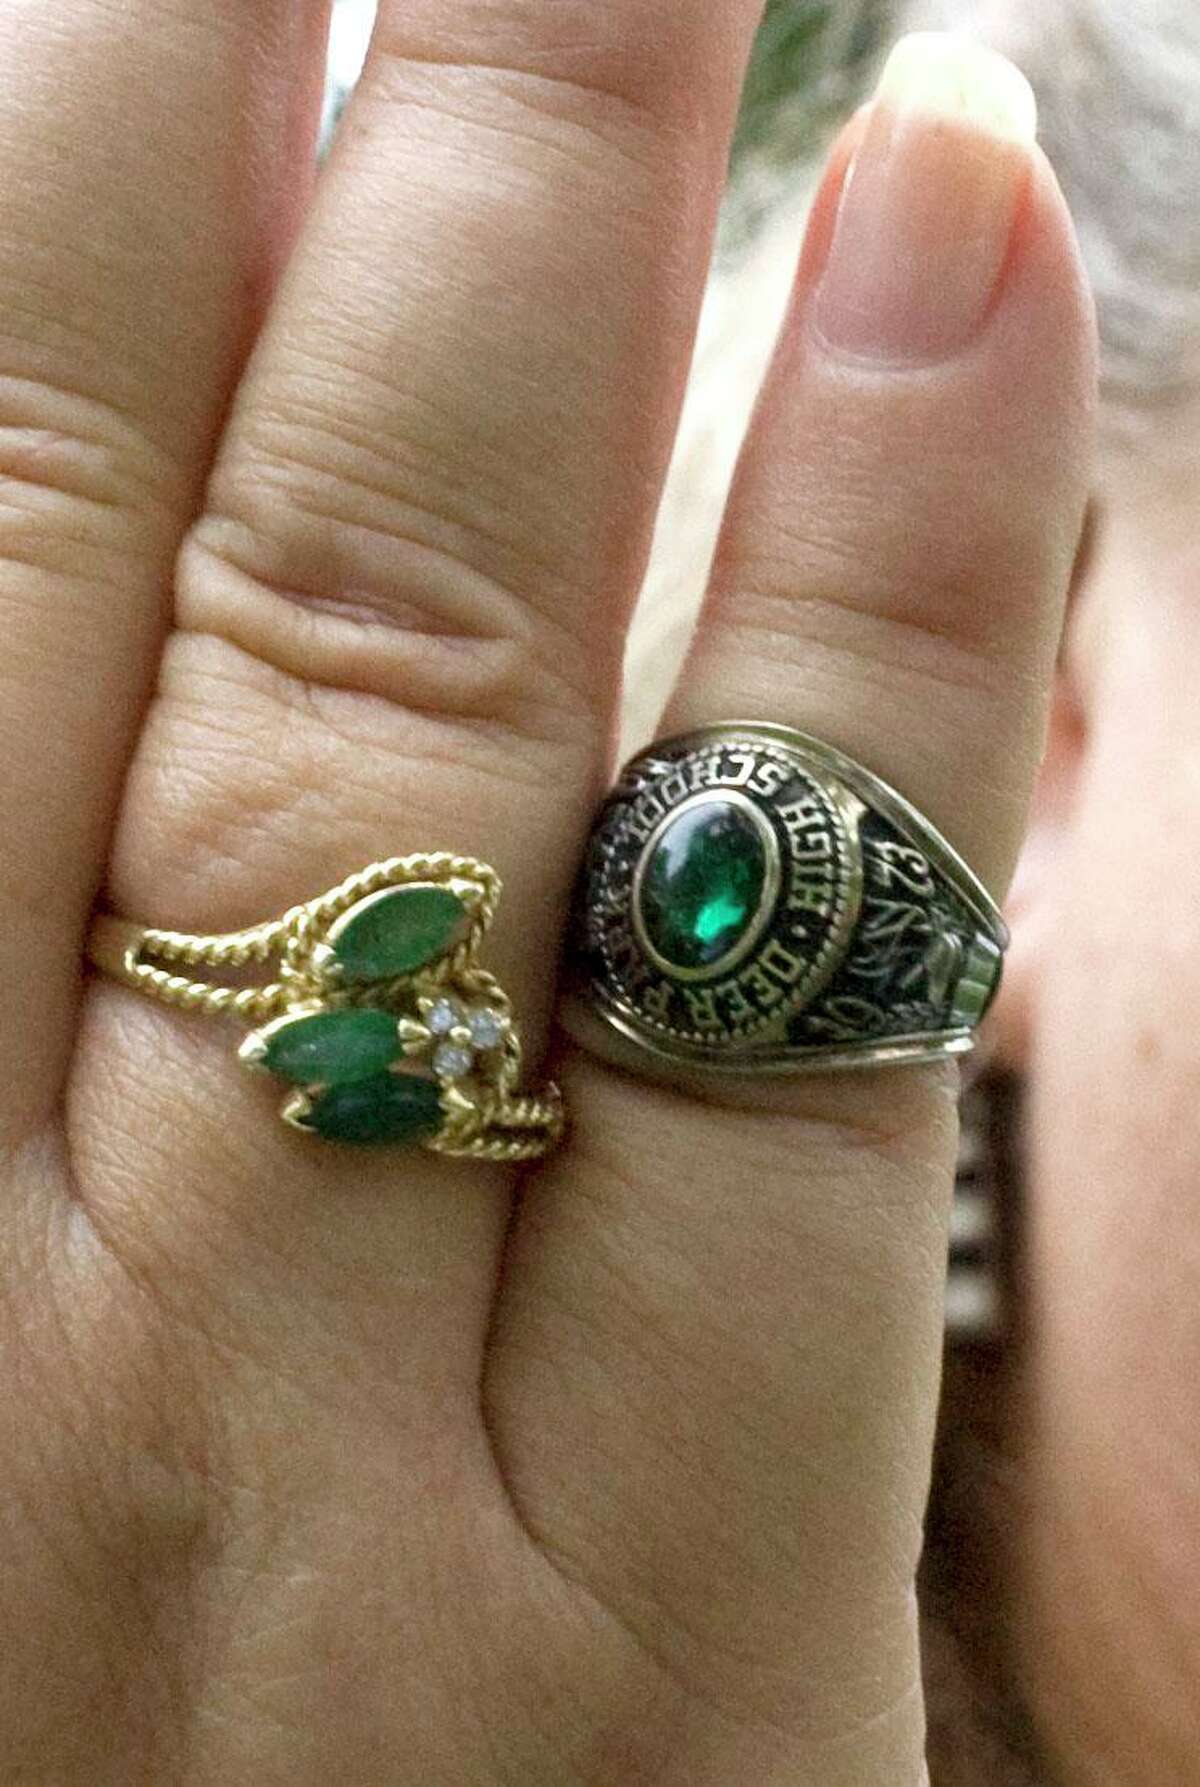 Seniors in the Class of 2021 in Pasadena, Deer Park and La Porte school districts are preparing for graduation — an accomplishment in which traditions such as caps and gowns and class rings are treasured. Judith Goode Fesler was overjoyed in 2010 when her Class of 1973 Deer Park High school graduation ring was returned 40 years after being lost at the San Jacinto Battleground State Historic Site.